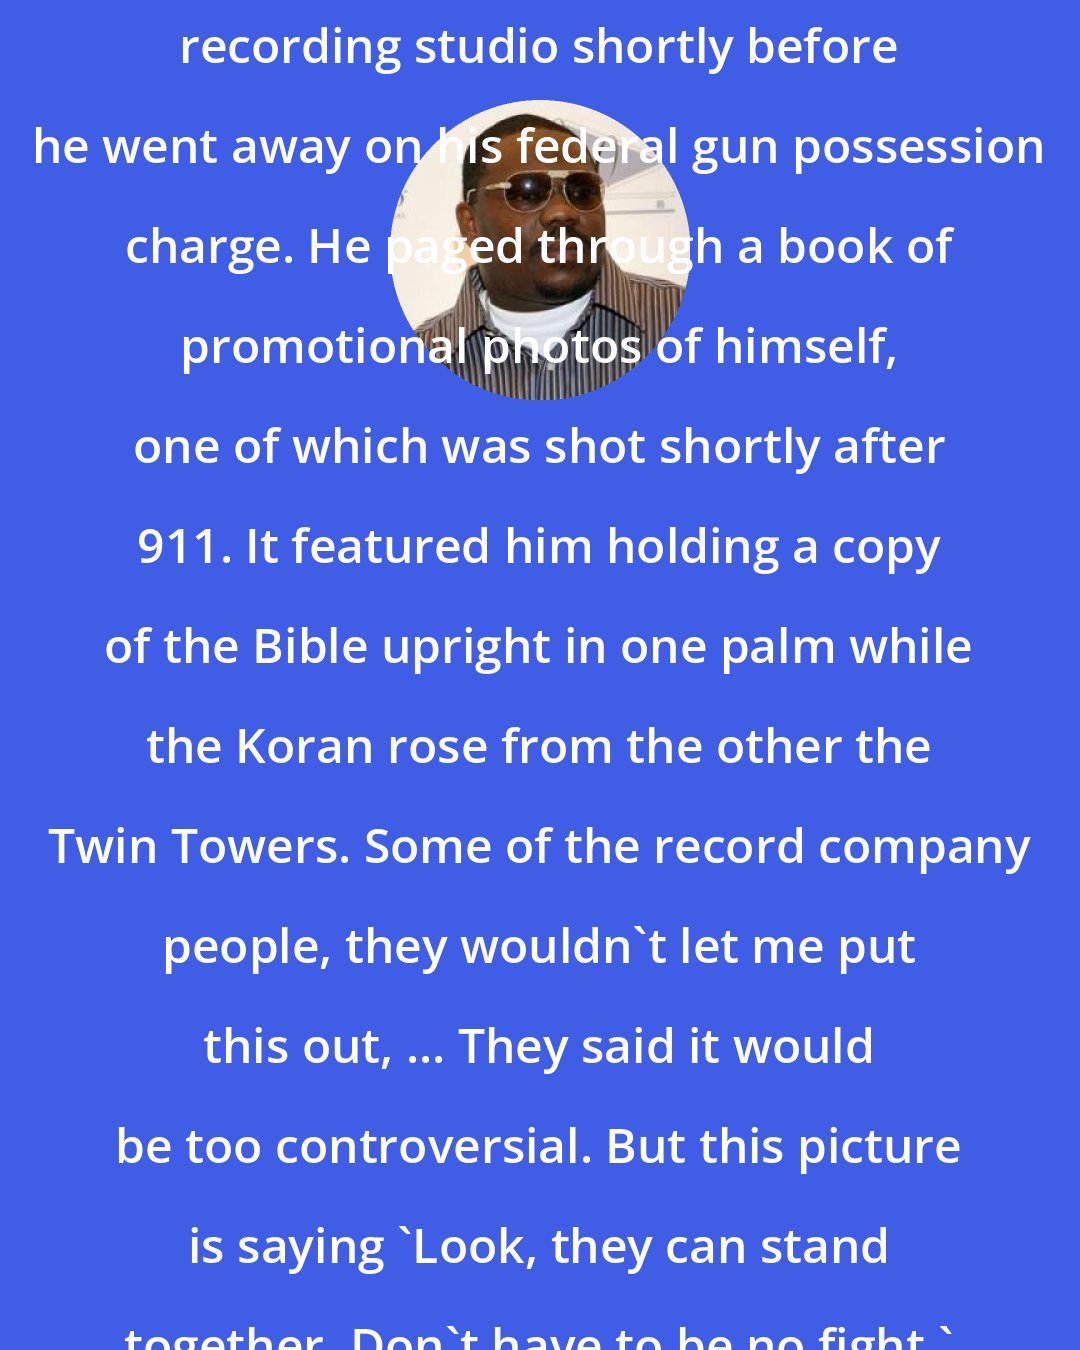 Beanie Sigel: PW spent time with Sigel in a New York recording studio shortly before he went away on his federal gun possession charge. He paged through a book of promotional photos of himself, one of which was shot shortly after 911. It featured him holding a copy of the Bible upright in one palm while the Koran rose from the other the Twin Towers. Some of the record company people, they wouldn't let me put this out, ... They said it would be too controversial. But this picture is saying 'Look, they can stand together. Don't have to be no fight.'